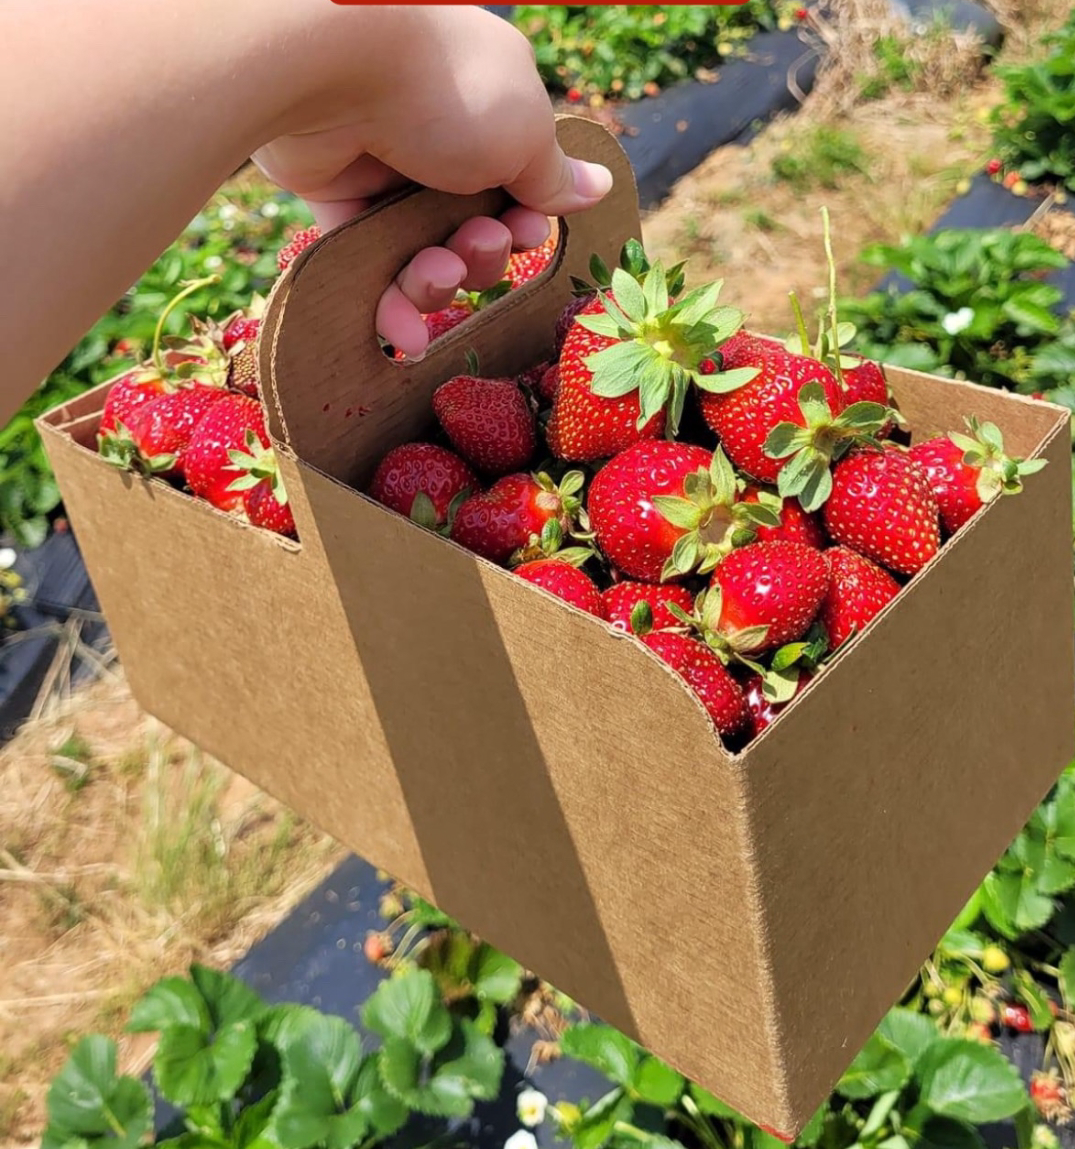 RESCHEDULED: Strawberries & Hayrides! Hall Family Farm Day (Sat, May 18)